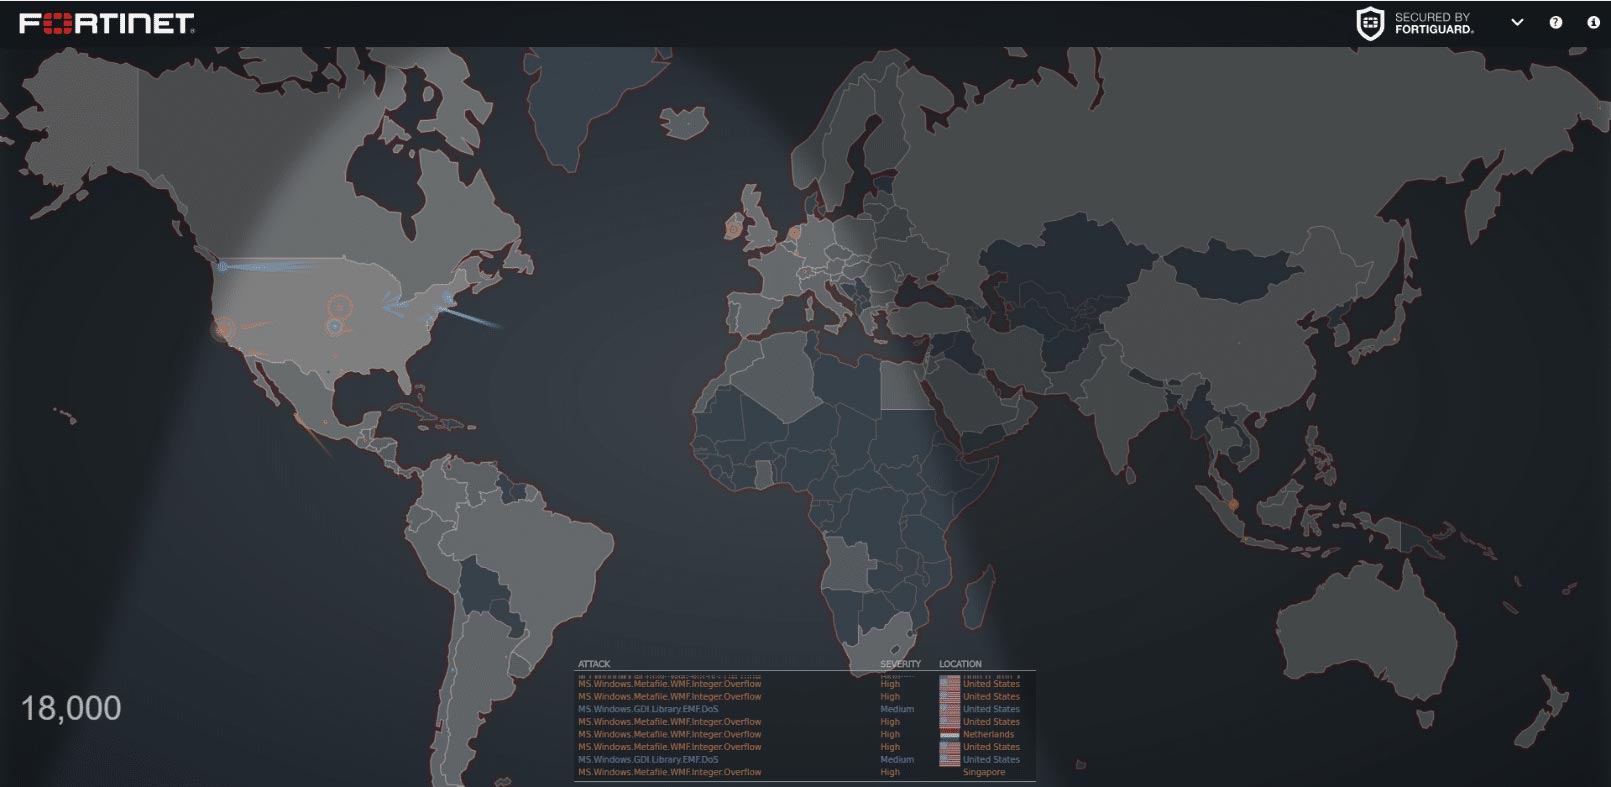 Cyber Attack Map by Fortinet